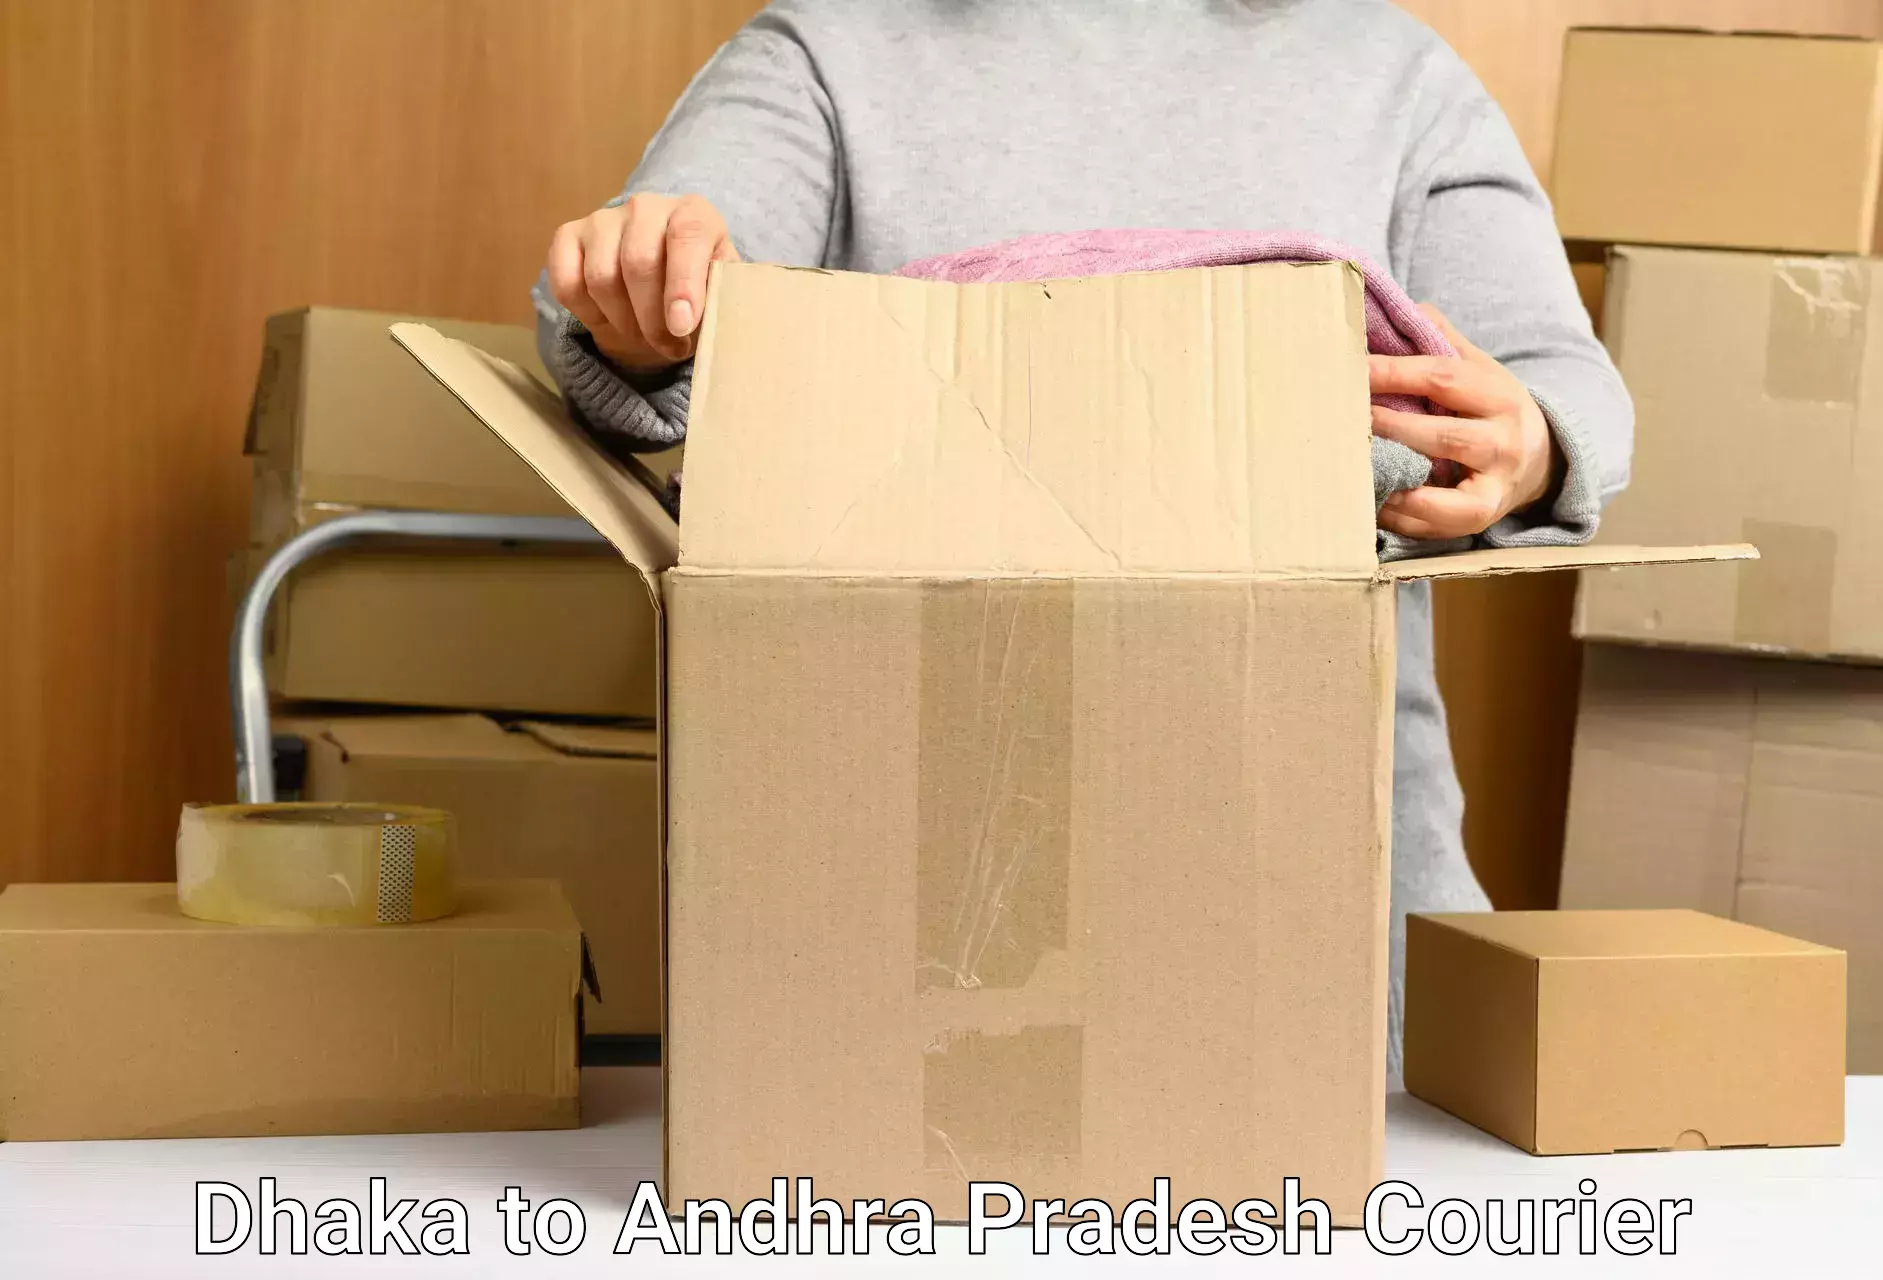 Easy access courier services Dhaka to Visakhapatnam Port